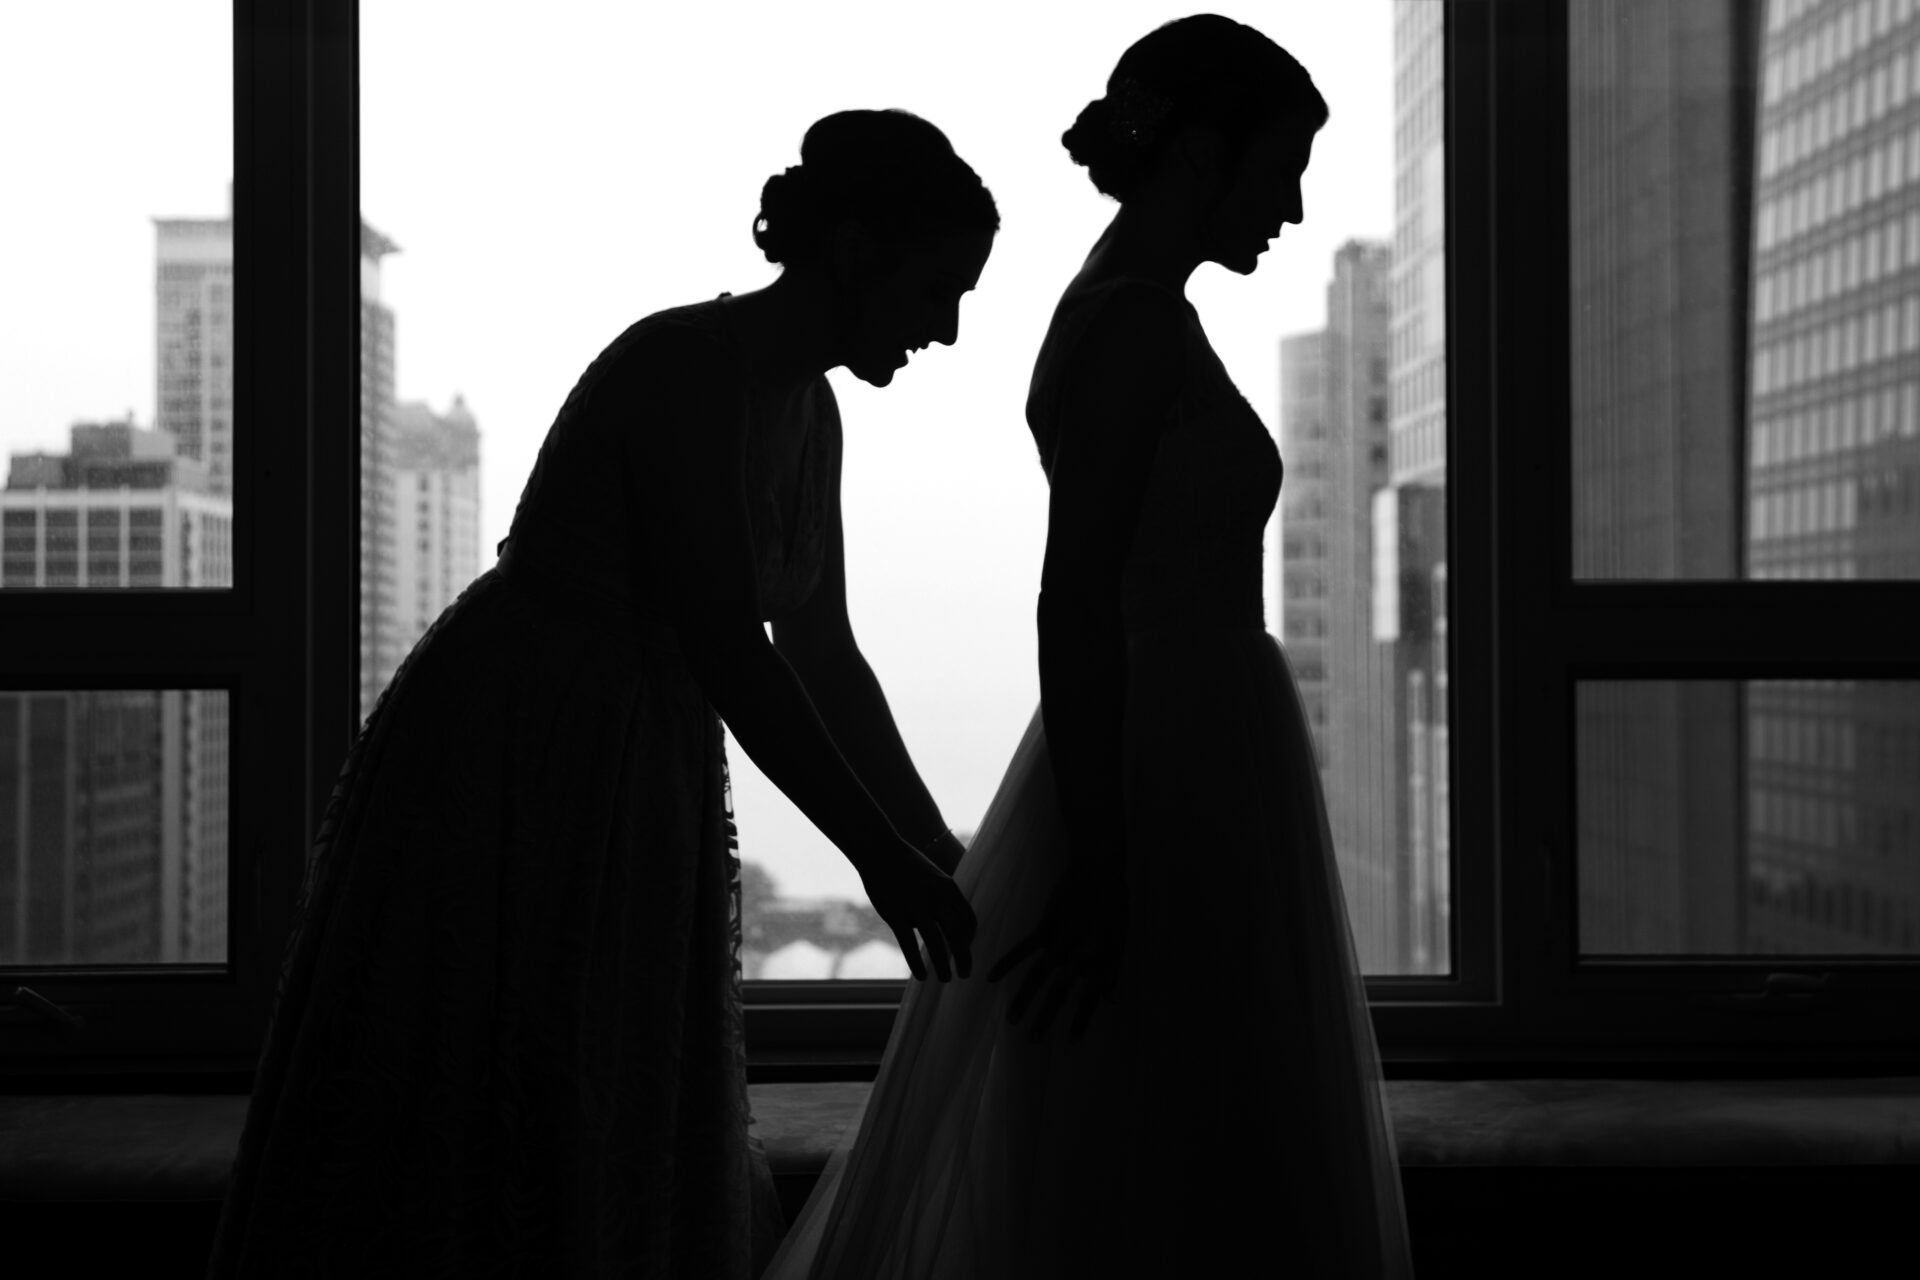 Wedding photo of a bride by Astrapia Photography